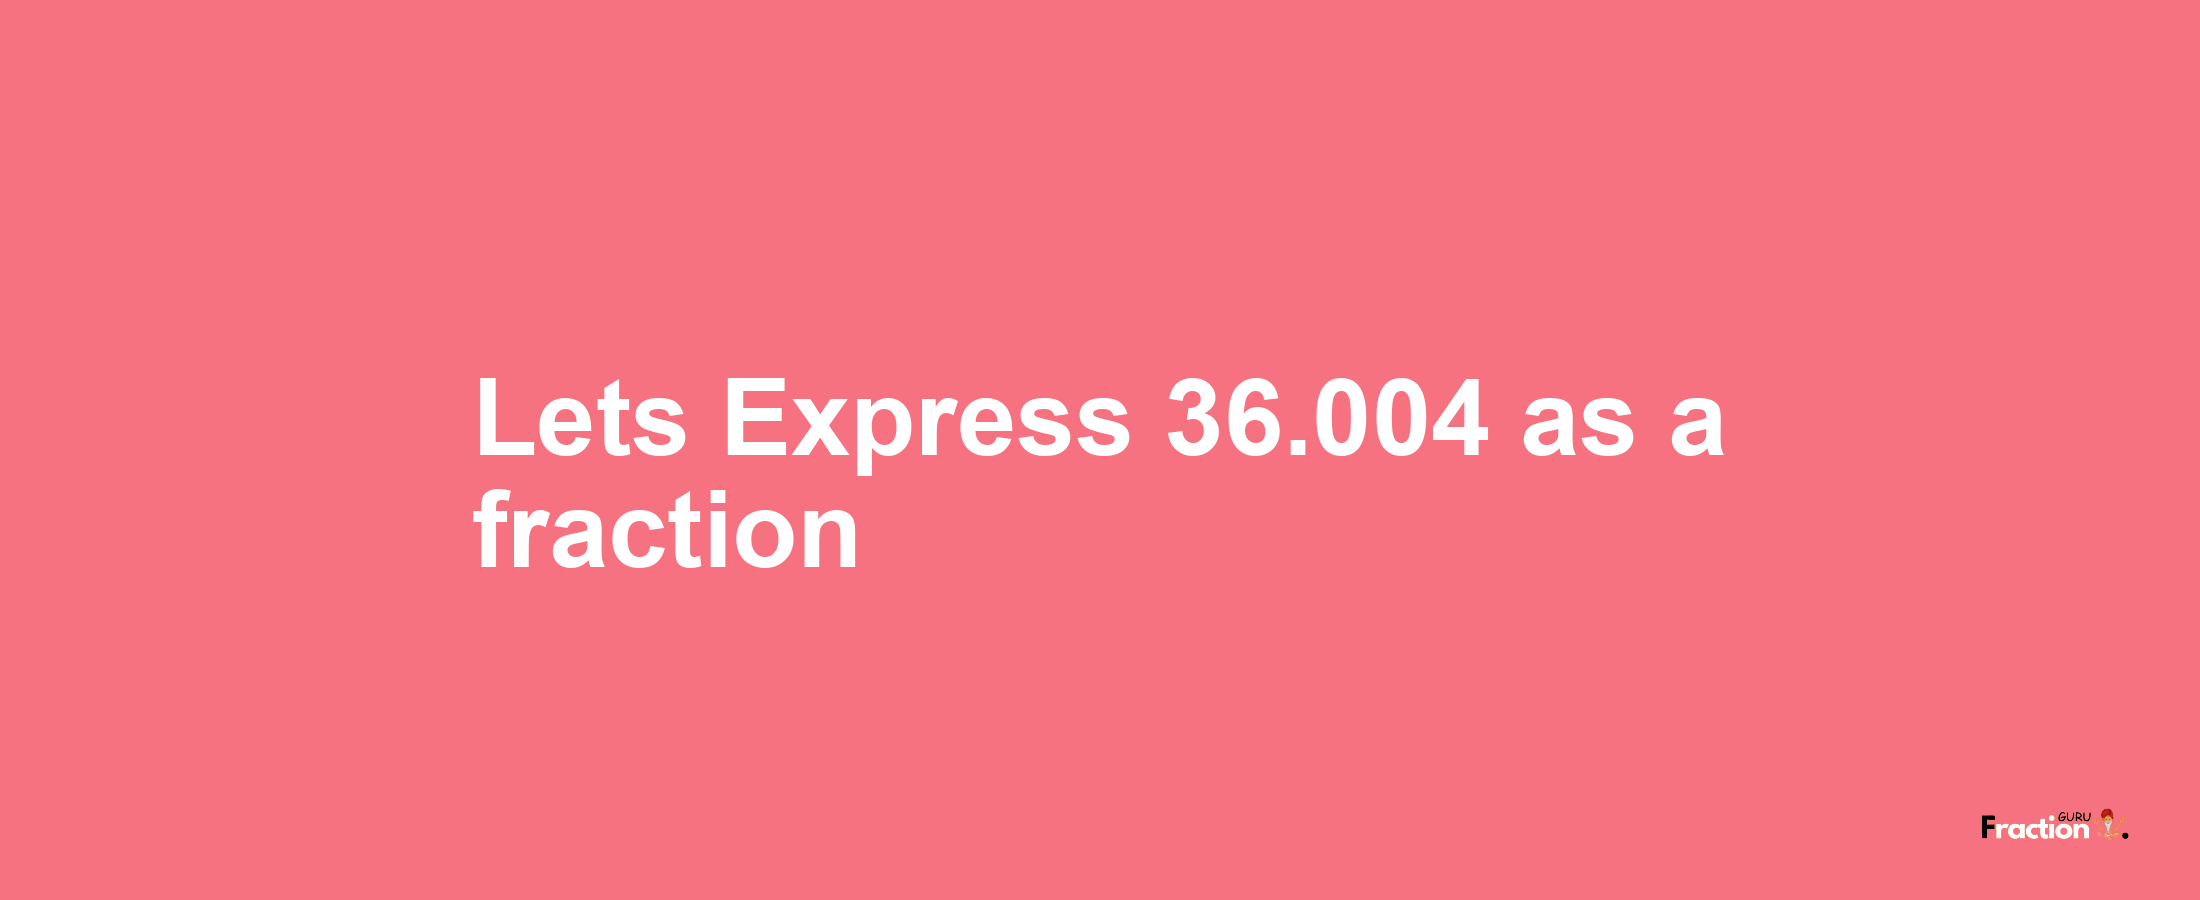 Lets Express 36.004 as afraction